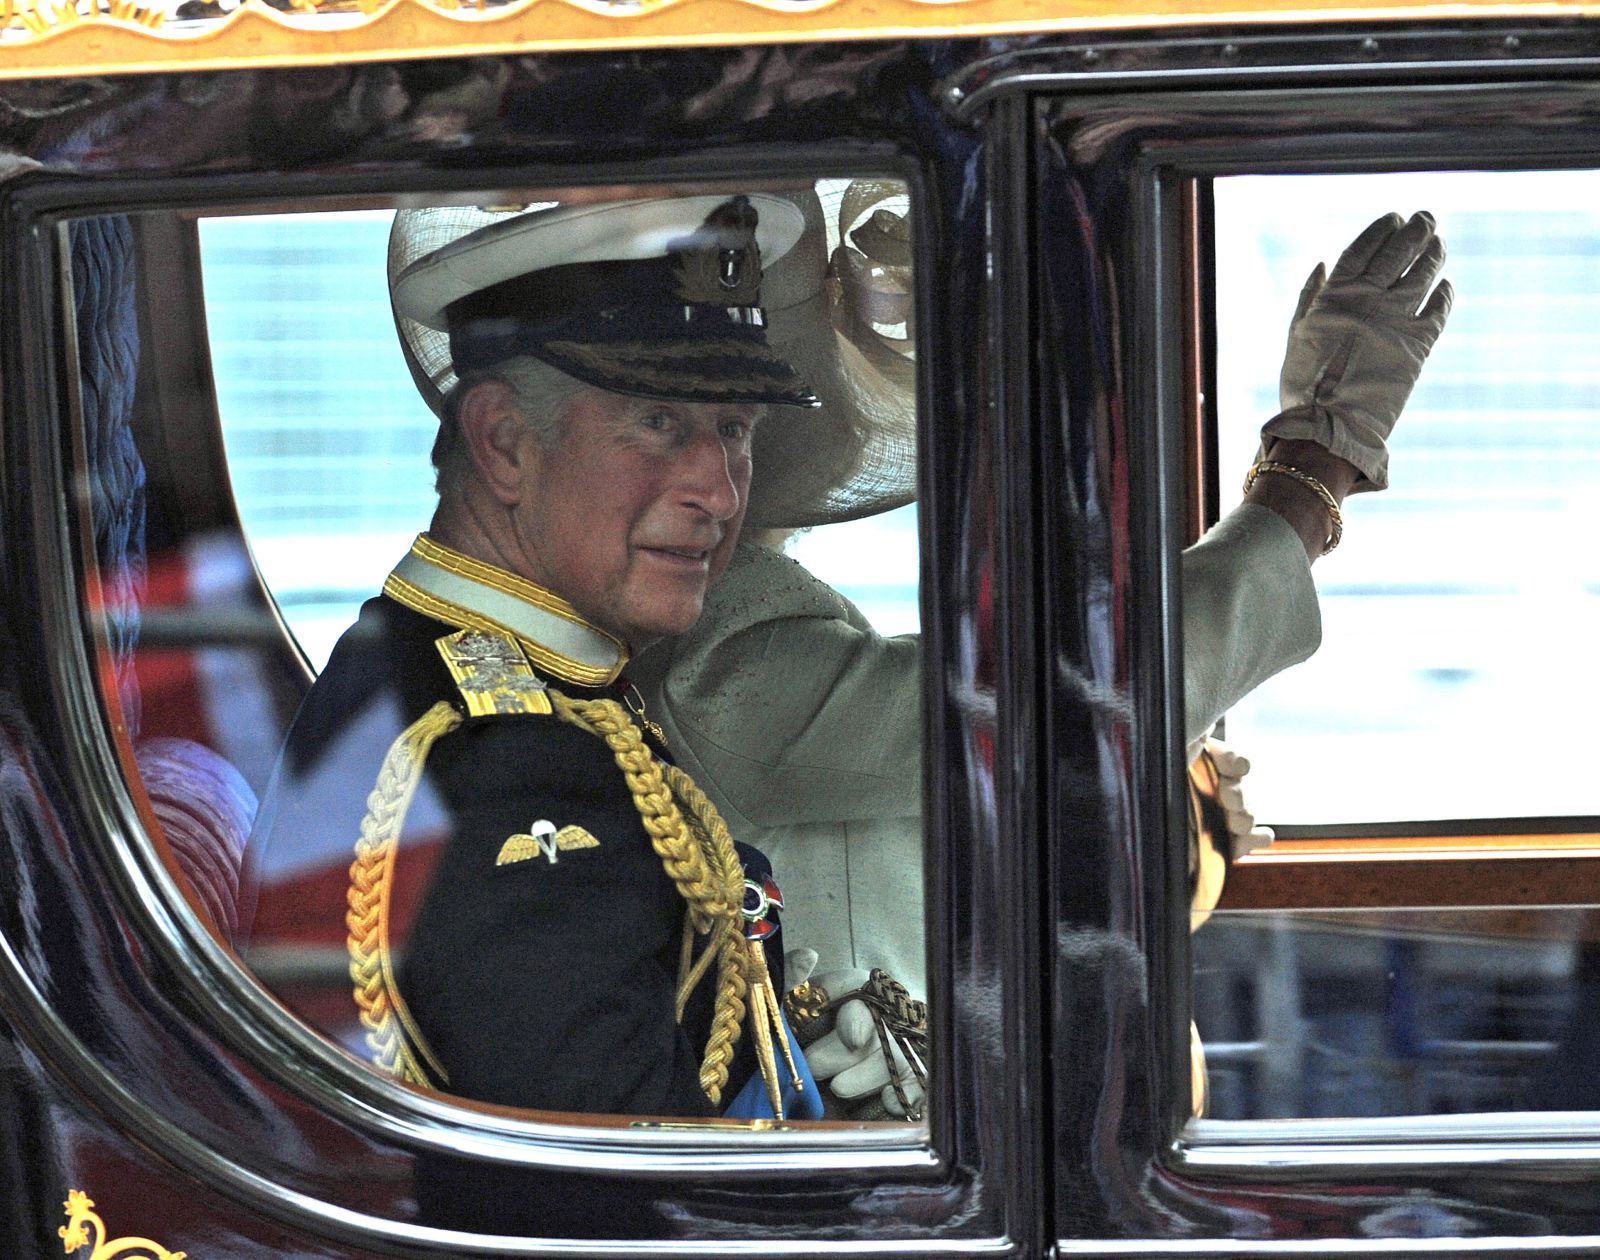 epa10610049 (FILE) - Britain's Prince Charles of Wales (L) and wife Camilla, the Duchess of Cornwall, wave as they proceed along Whitehall, after the marriage of Prince William and Kate Middleton at Westminster Abbey, in London, Britain, 29 April 2011 (reissued 05 May 2023). Britain's King Charles III's Coronation will take place at Westminster Abbey in London on 06 May 2023. The King will be crowned alongside Camilla, the Queen Consort.  EPA/GERRY PENNY *** Local Caption *** 00000402636386